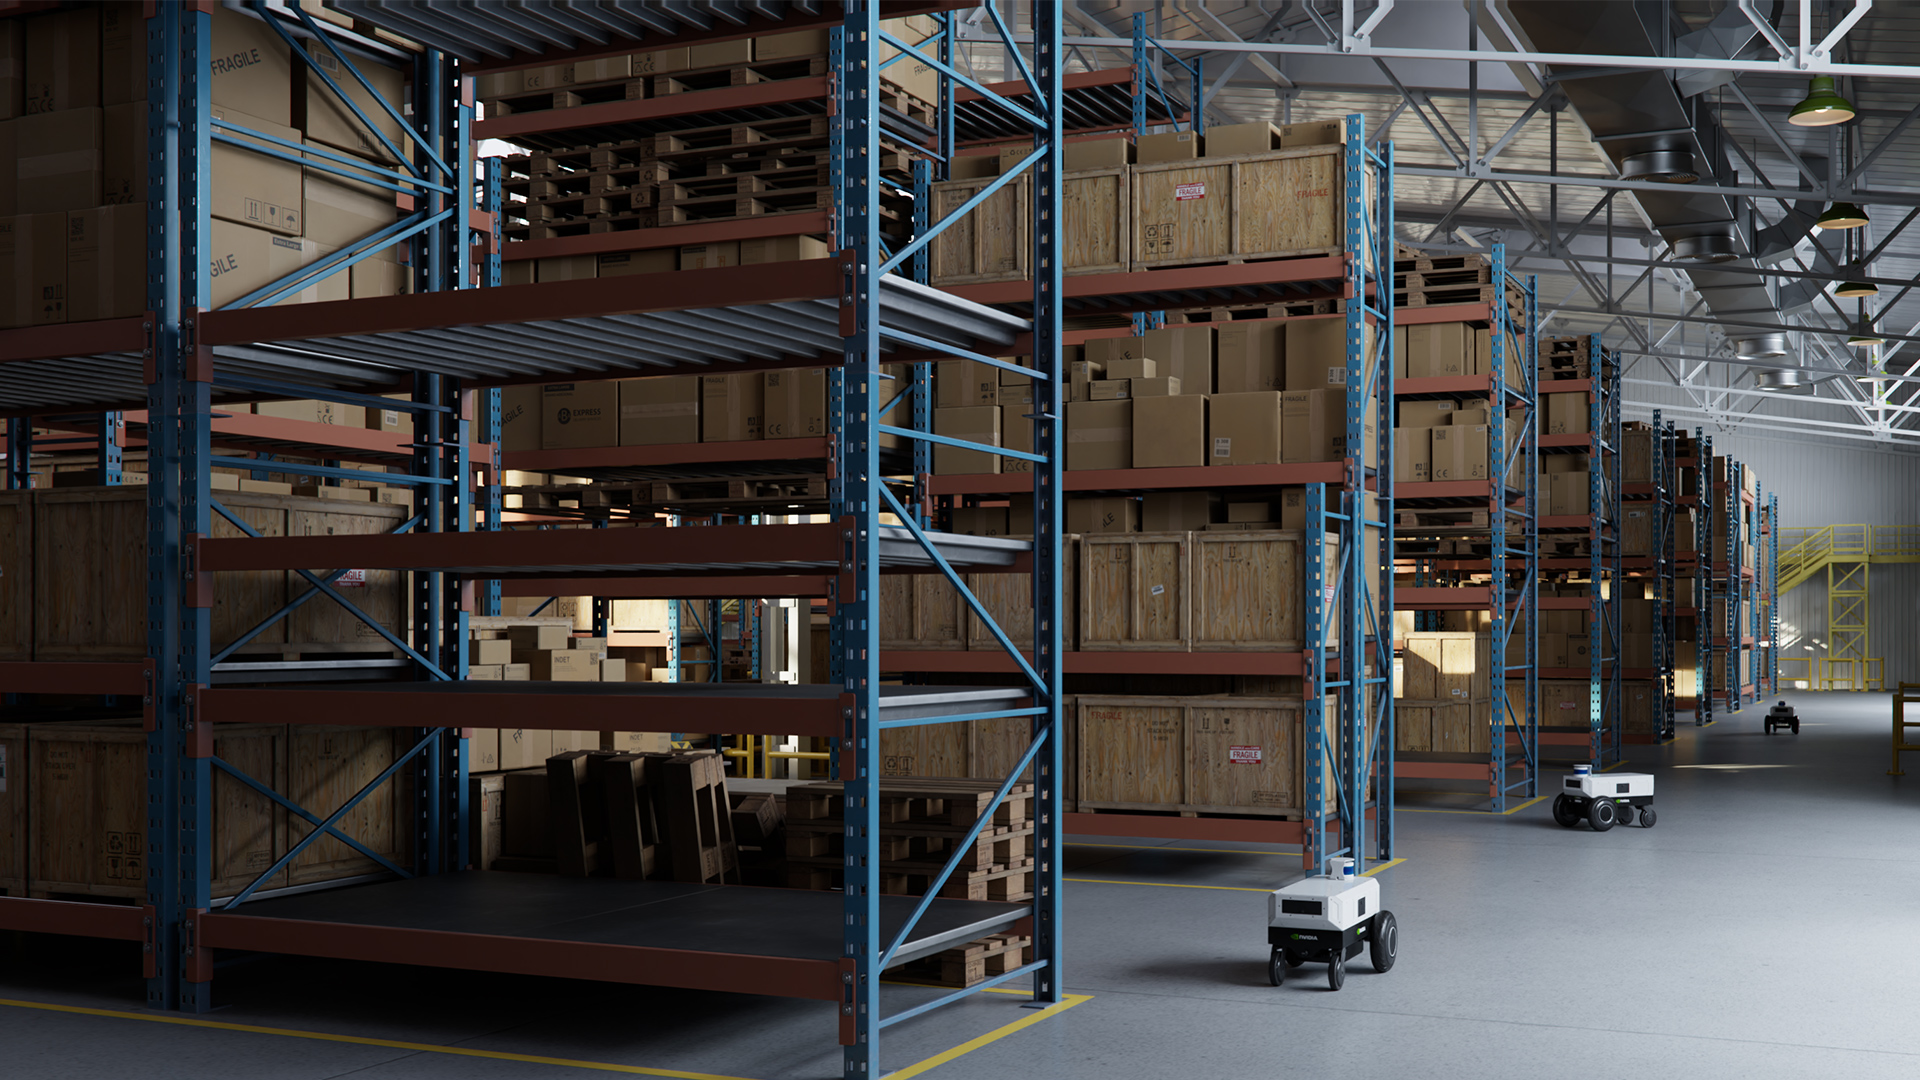 Robots in warehouse